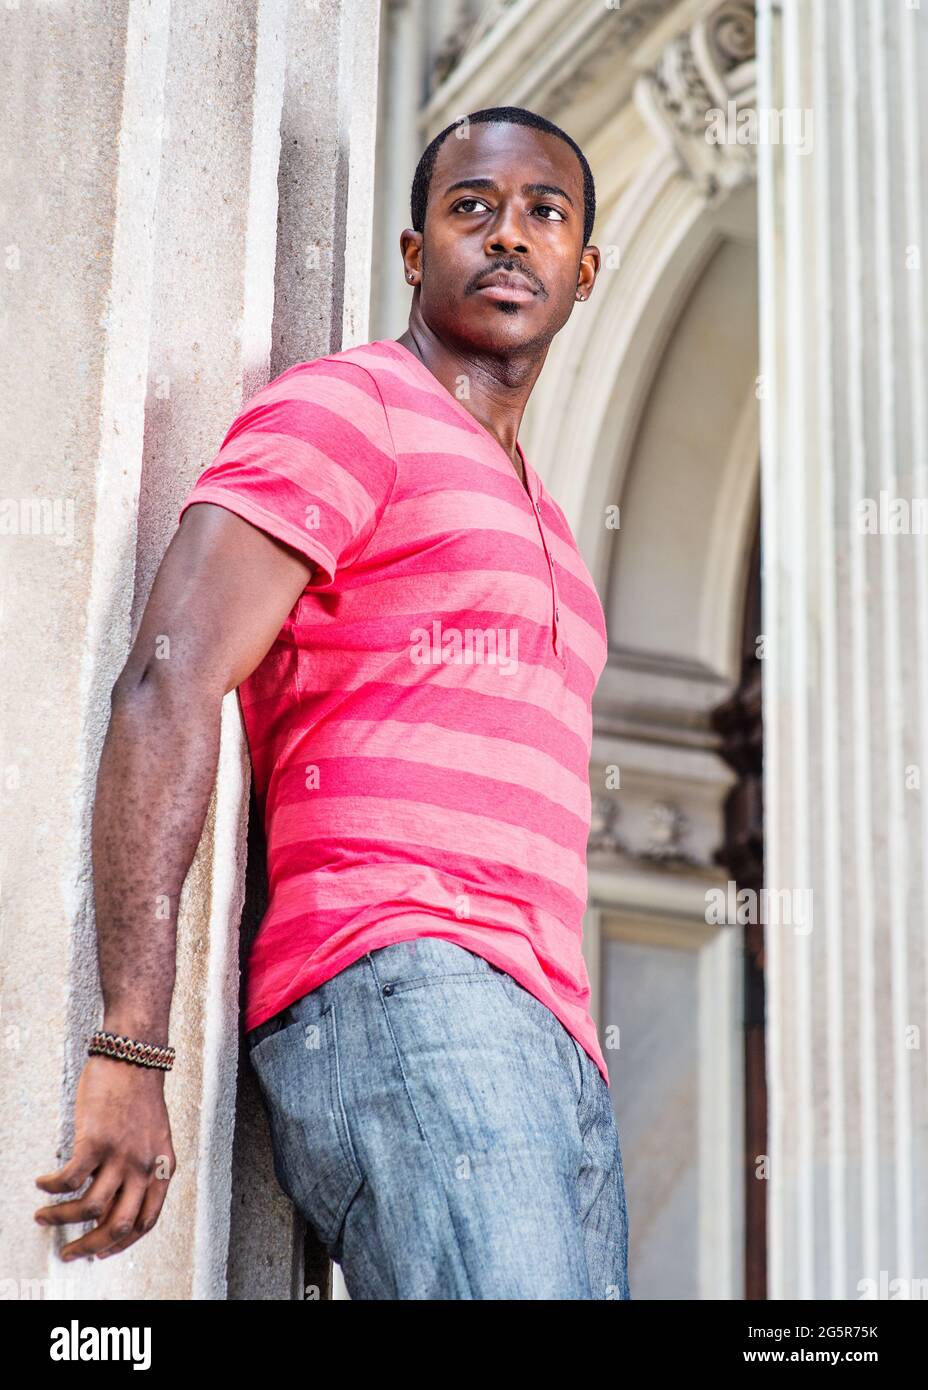 Young Man. Dressing in red, pink lines T-shirt,  gray pants, wearing a bracelet, a young black man is standing by a pillar, confidently looking forwar Stock Photo